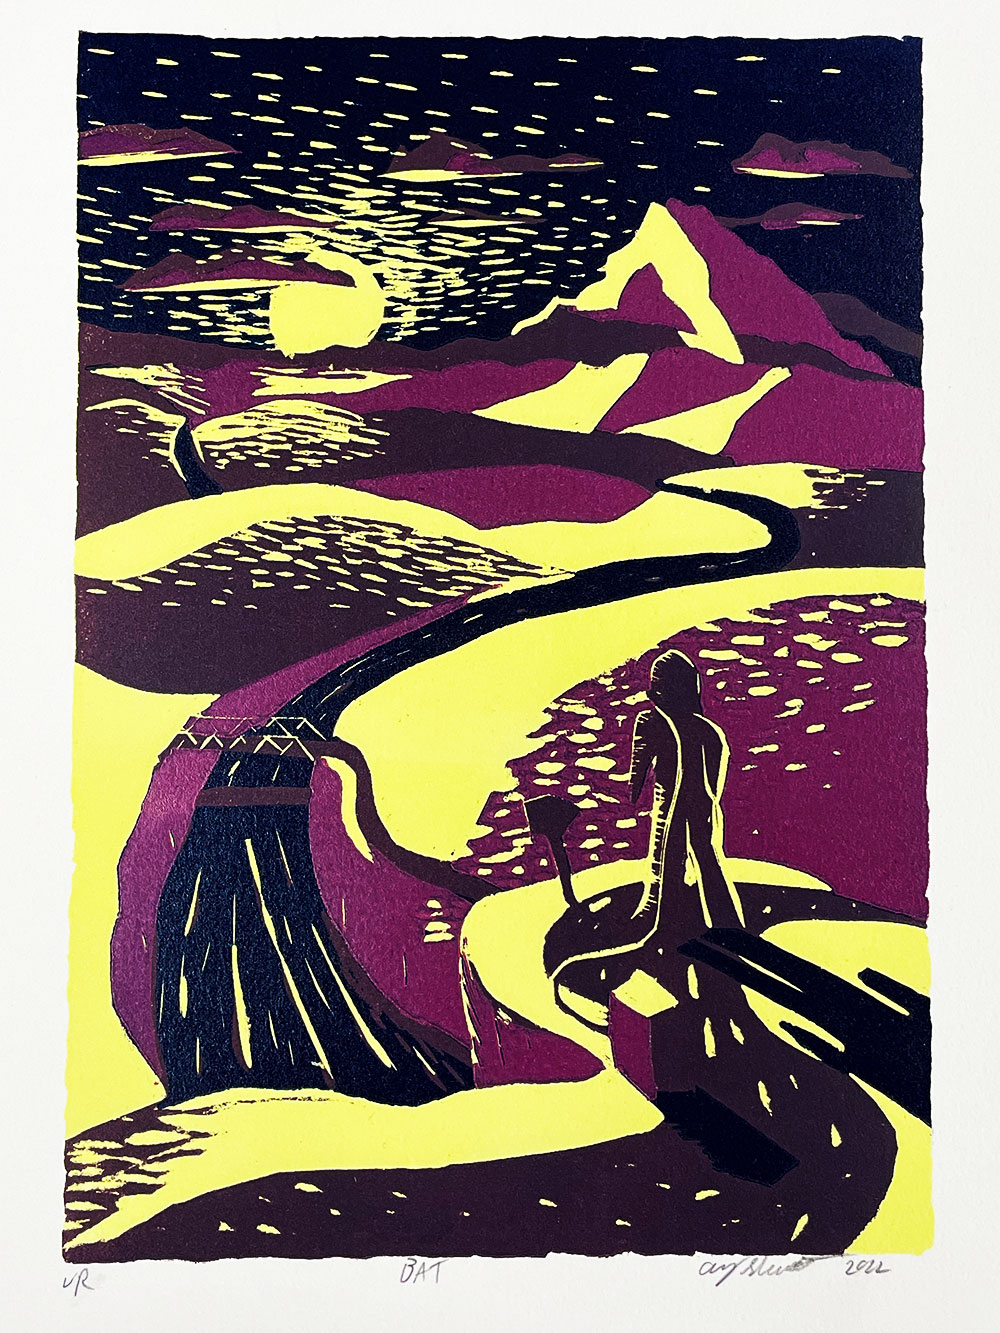 A printed image composed of a human walking alone in the desert - in the distance you can see a mountain and the sun beginning to set. Printed using various shades of purples and yellows.